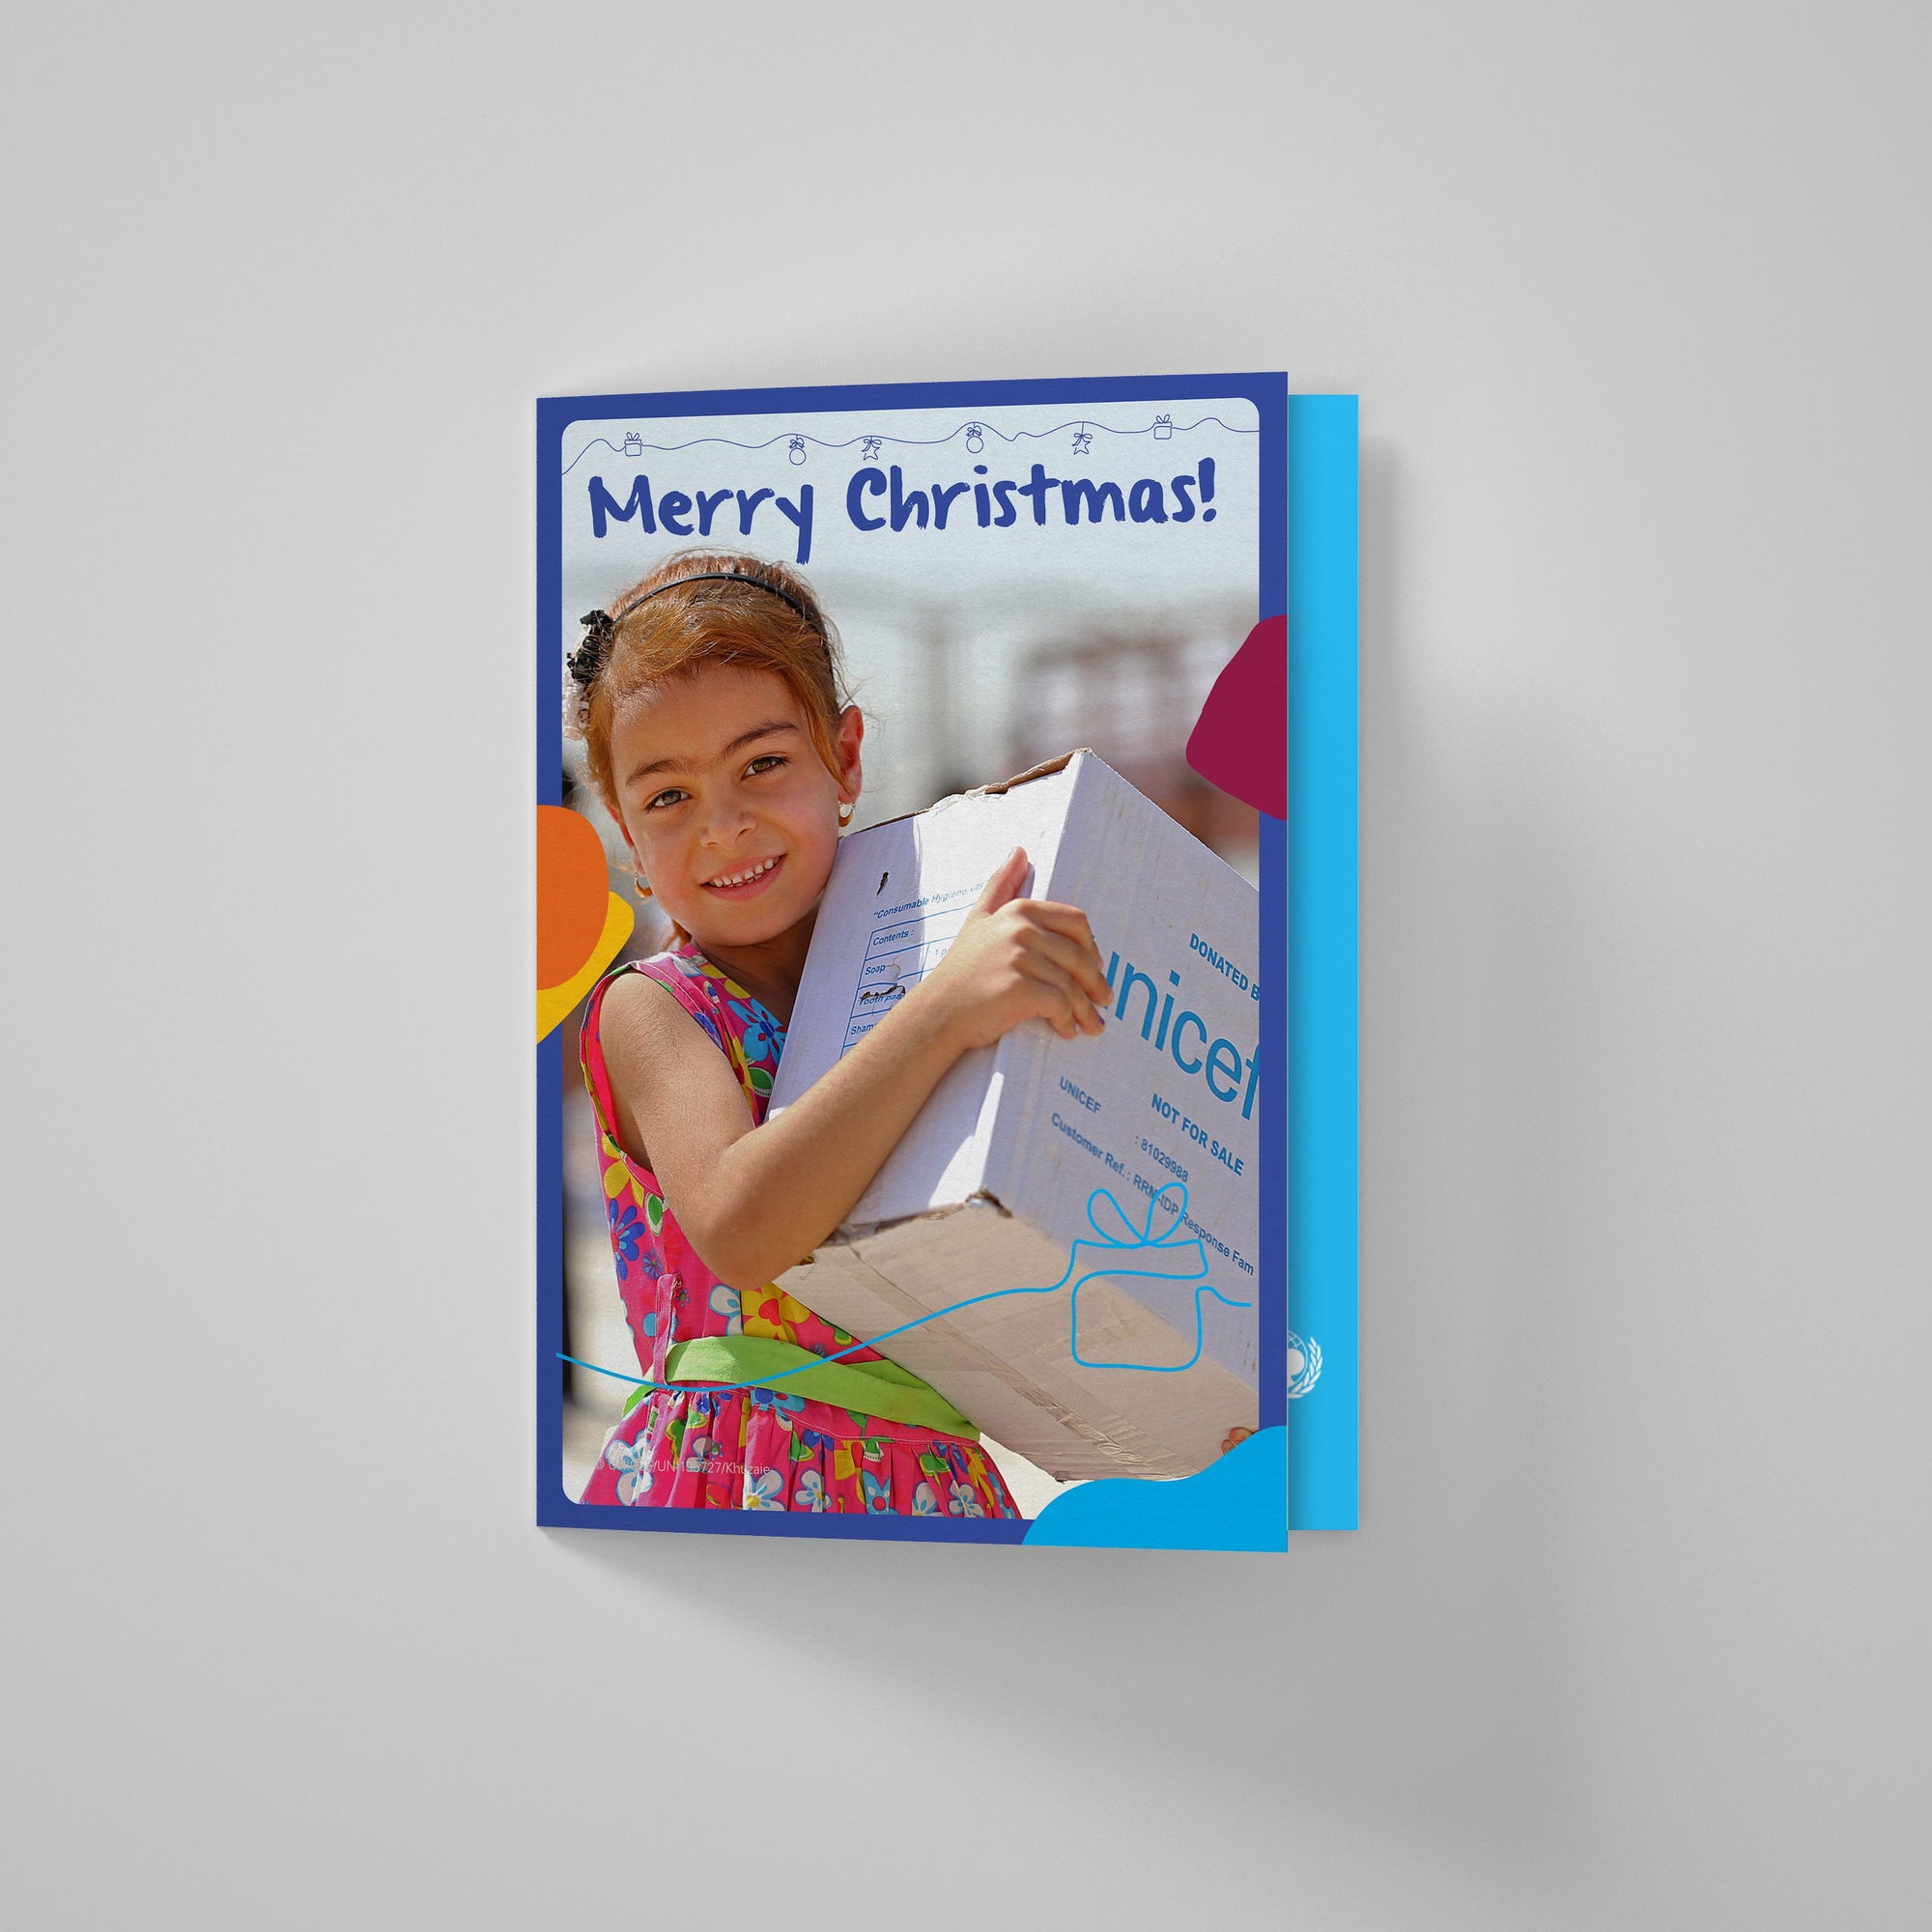 UNICEF Charity Christmas Gifts Card